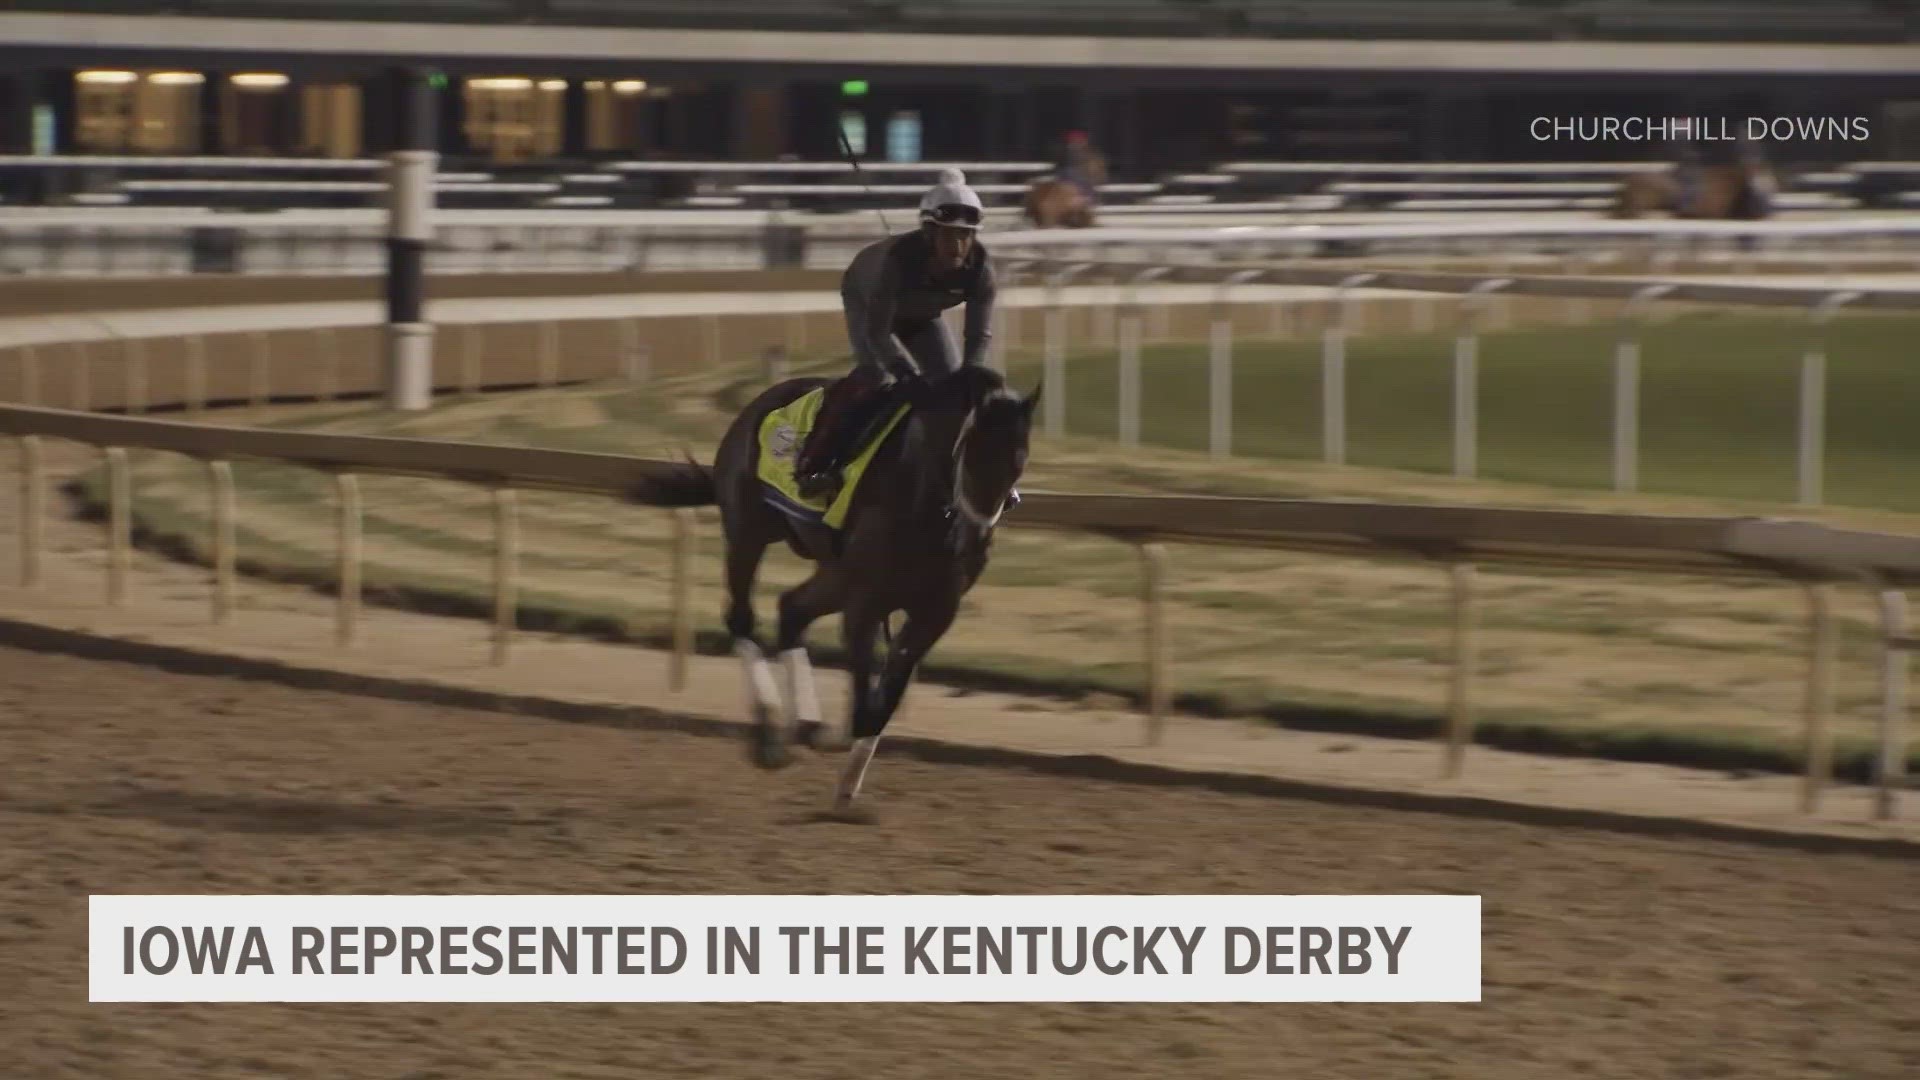 The Kentucky Derby is considered the Super Bowl of horse racing. This year, three Iowa-based horses have a shot at winning.